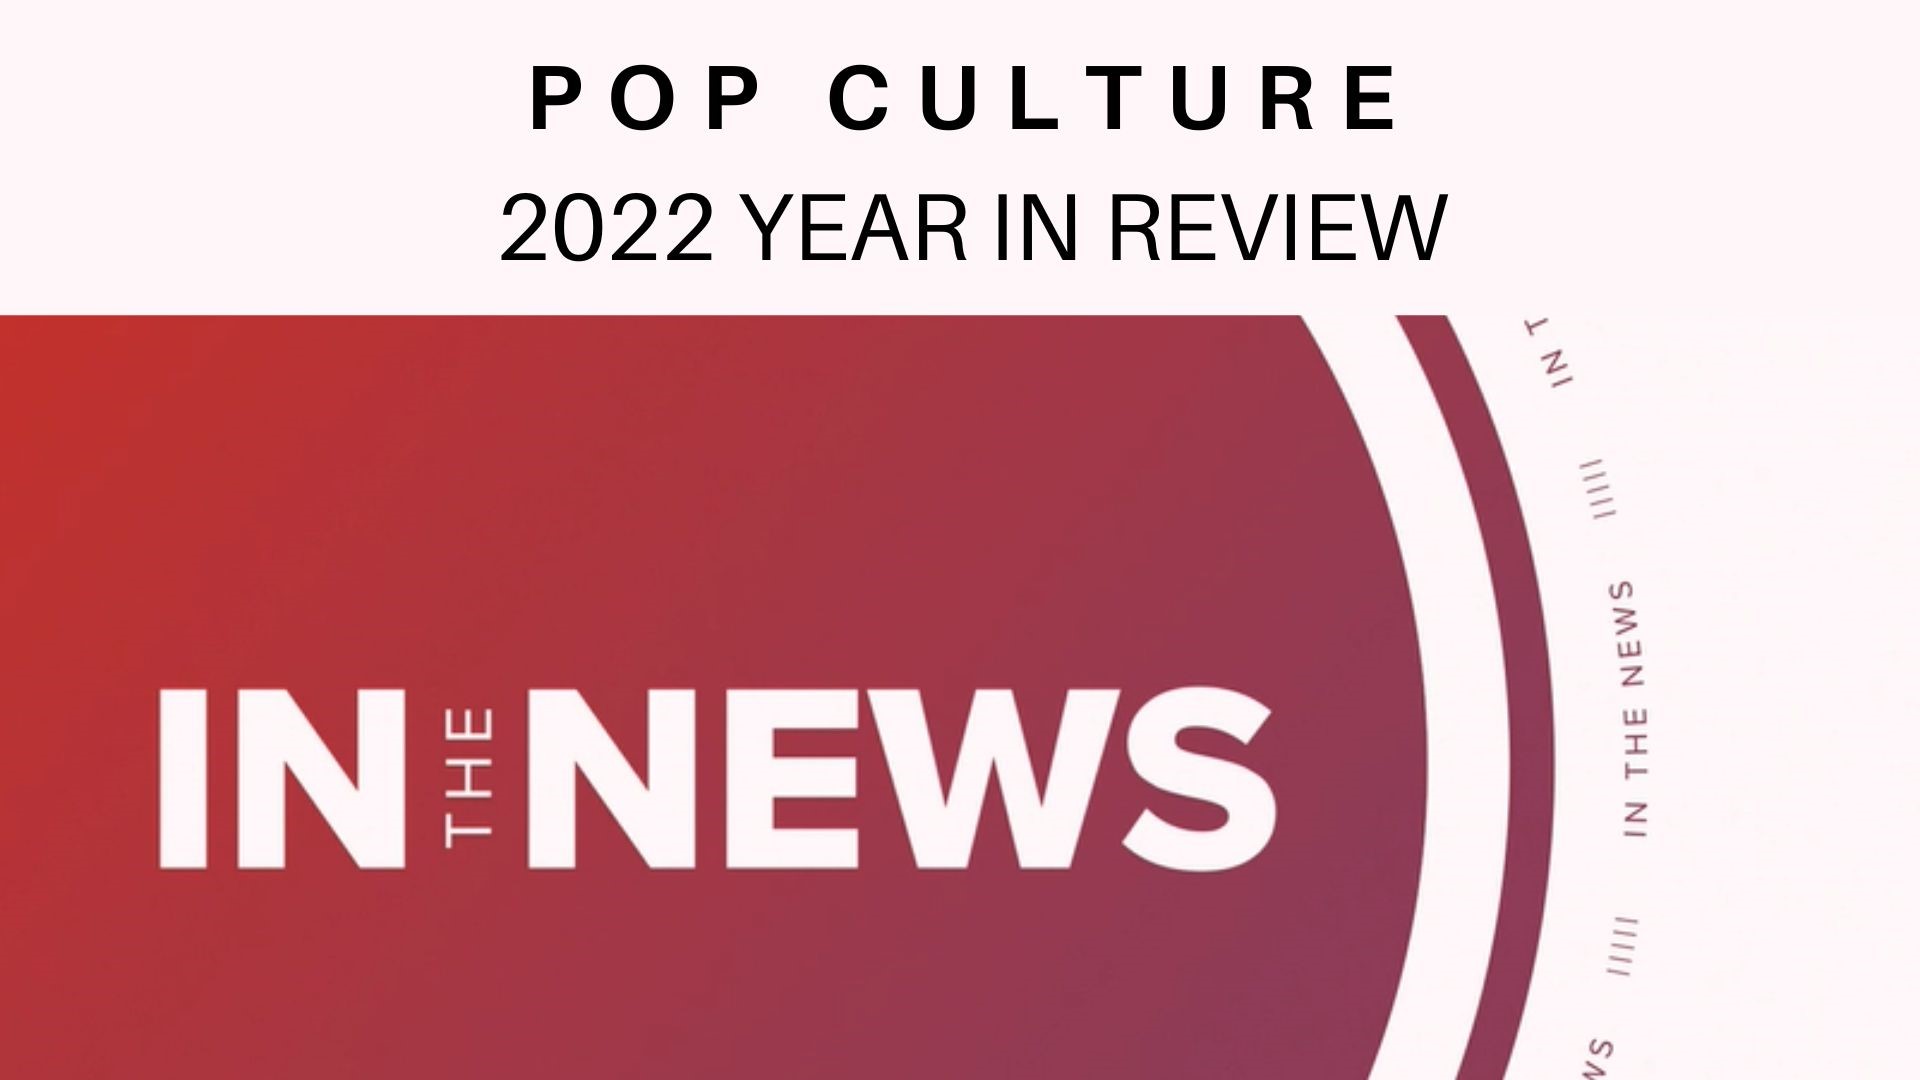 In the News takes a look back at the world of celebrity and pop culture news in 2022.